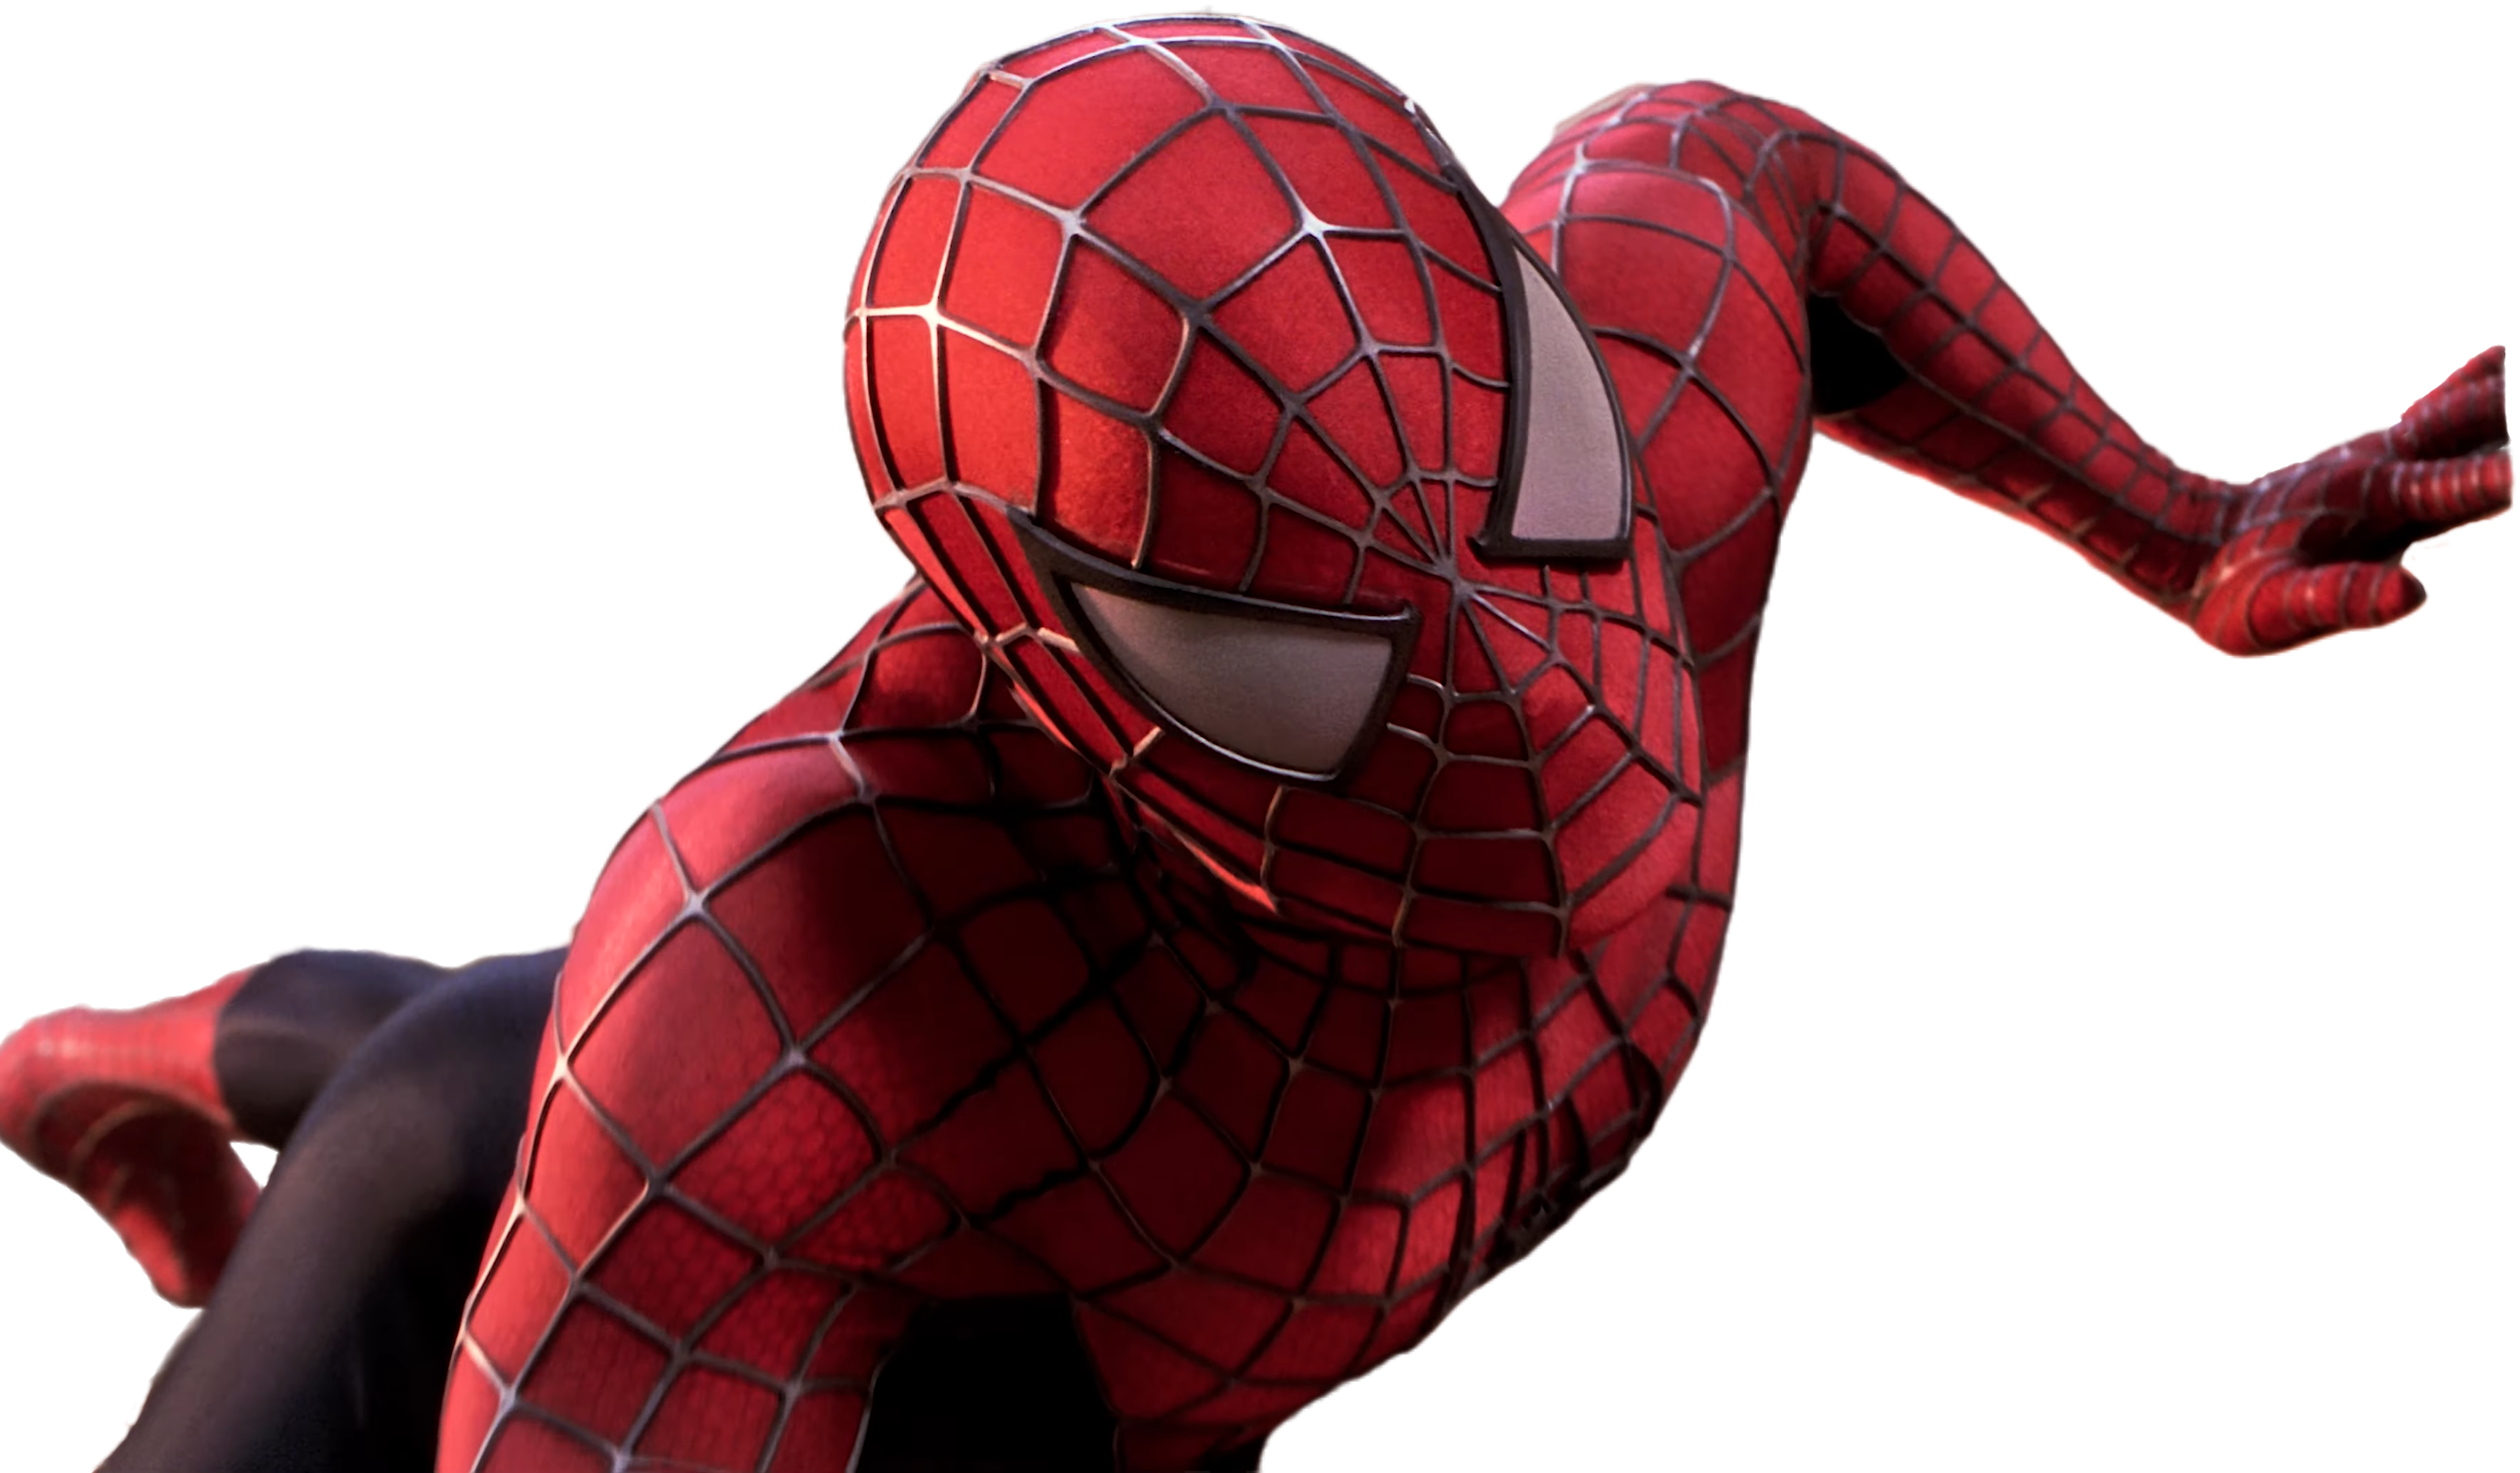 Spider-Man PNG (Tobey Maguire) by VegPNGs on DeviantArt